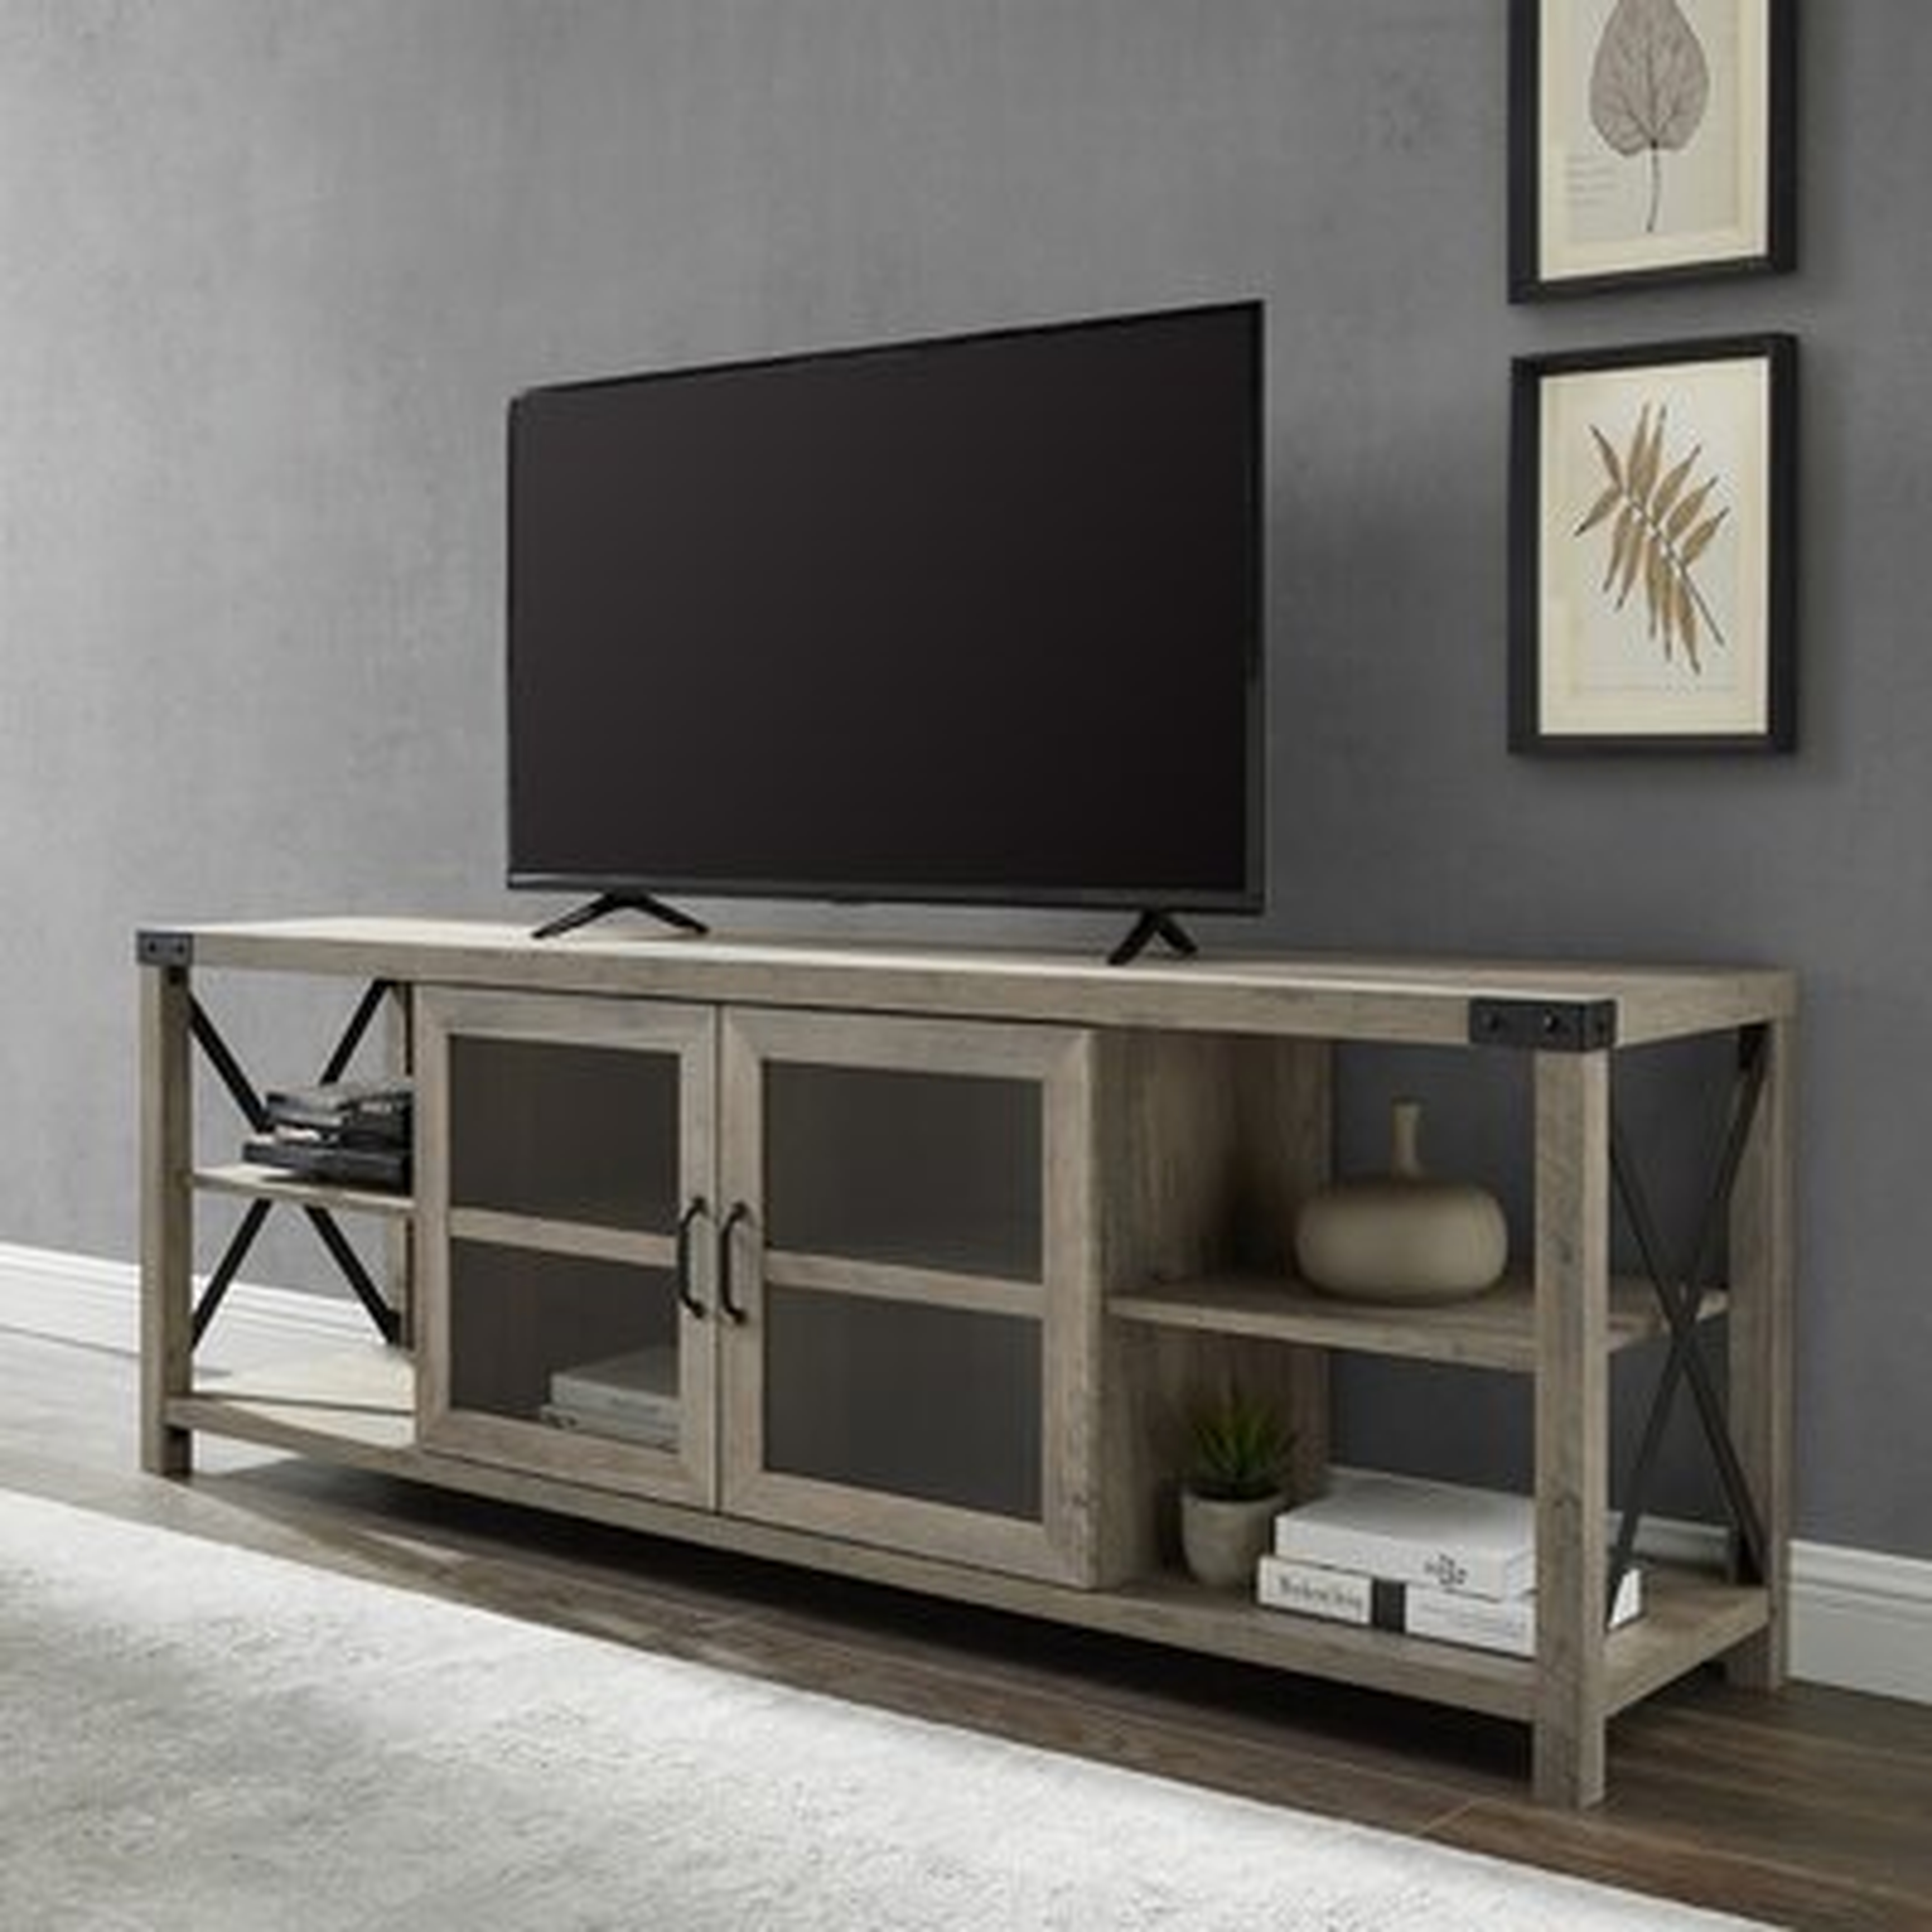 Rowland TV Stand for TVs up to 78 inches - Birch Lane